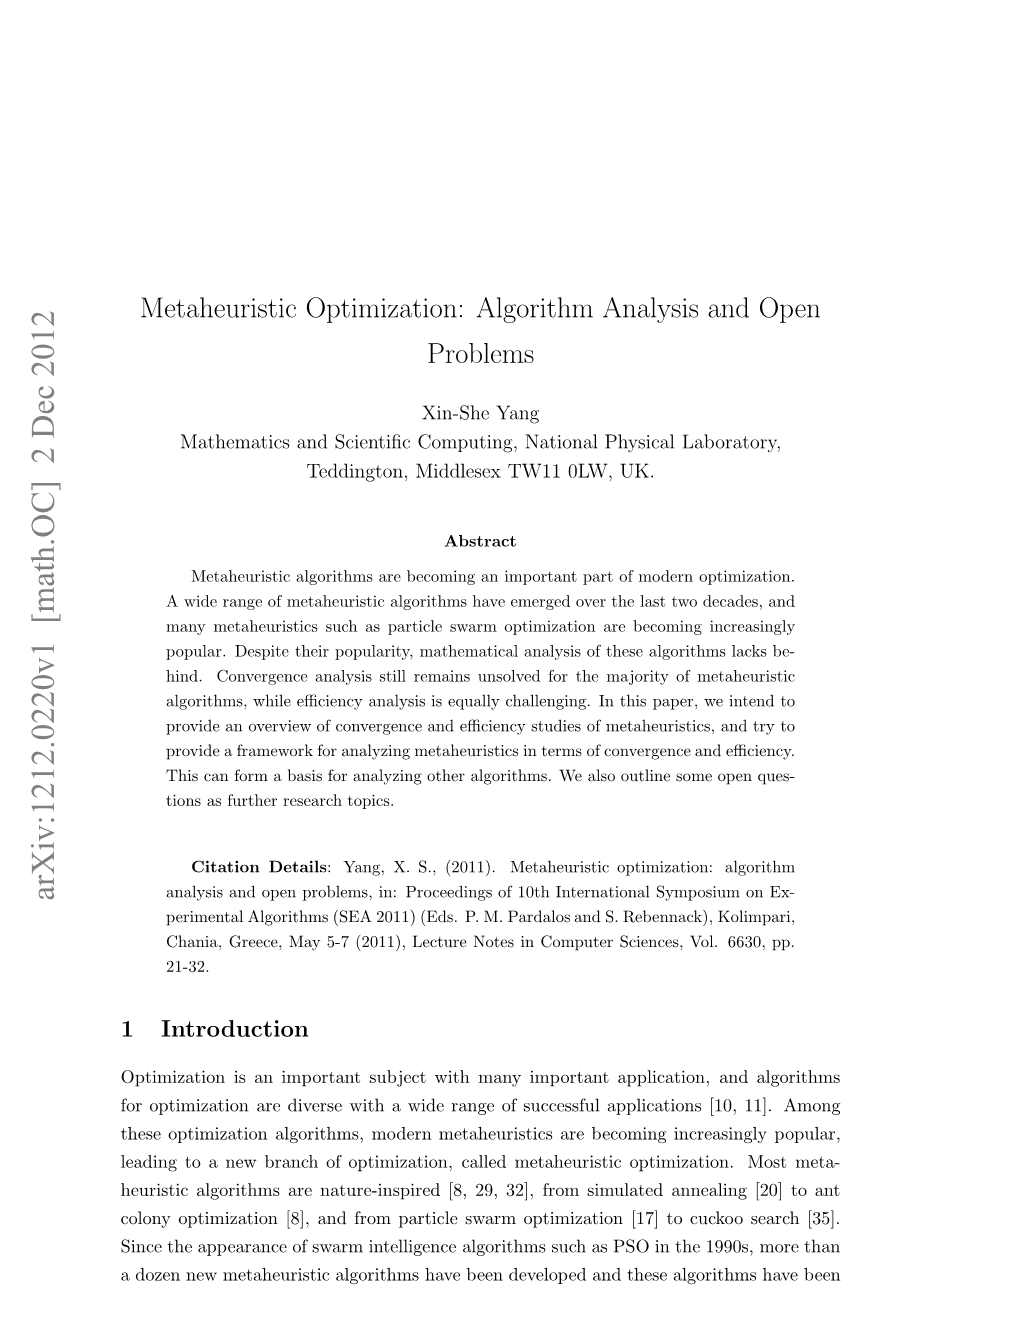 Metaheuristic Optimization: Algorithm Analysis and Open Problems